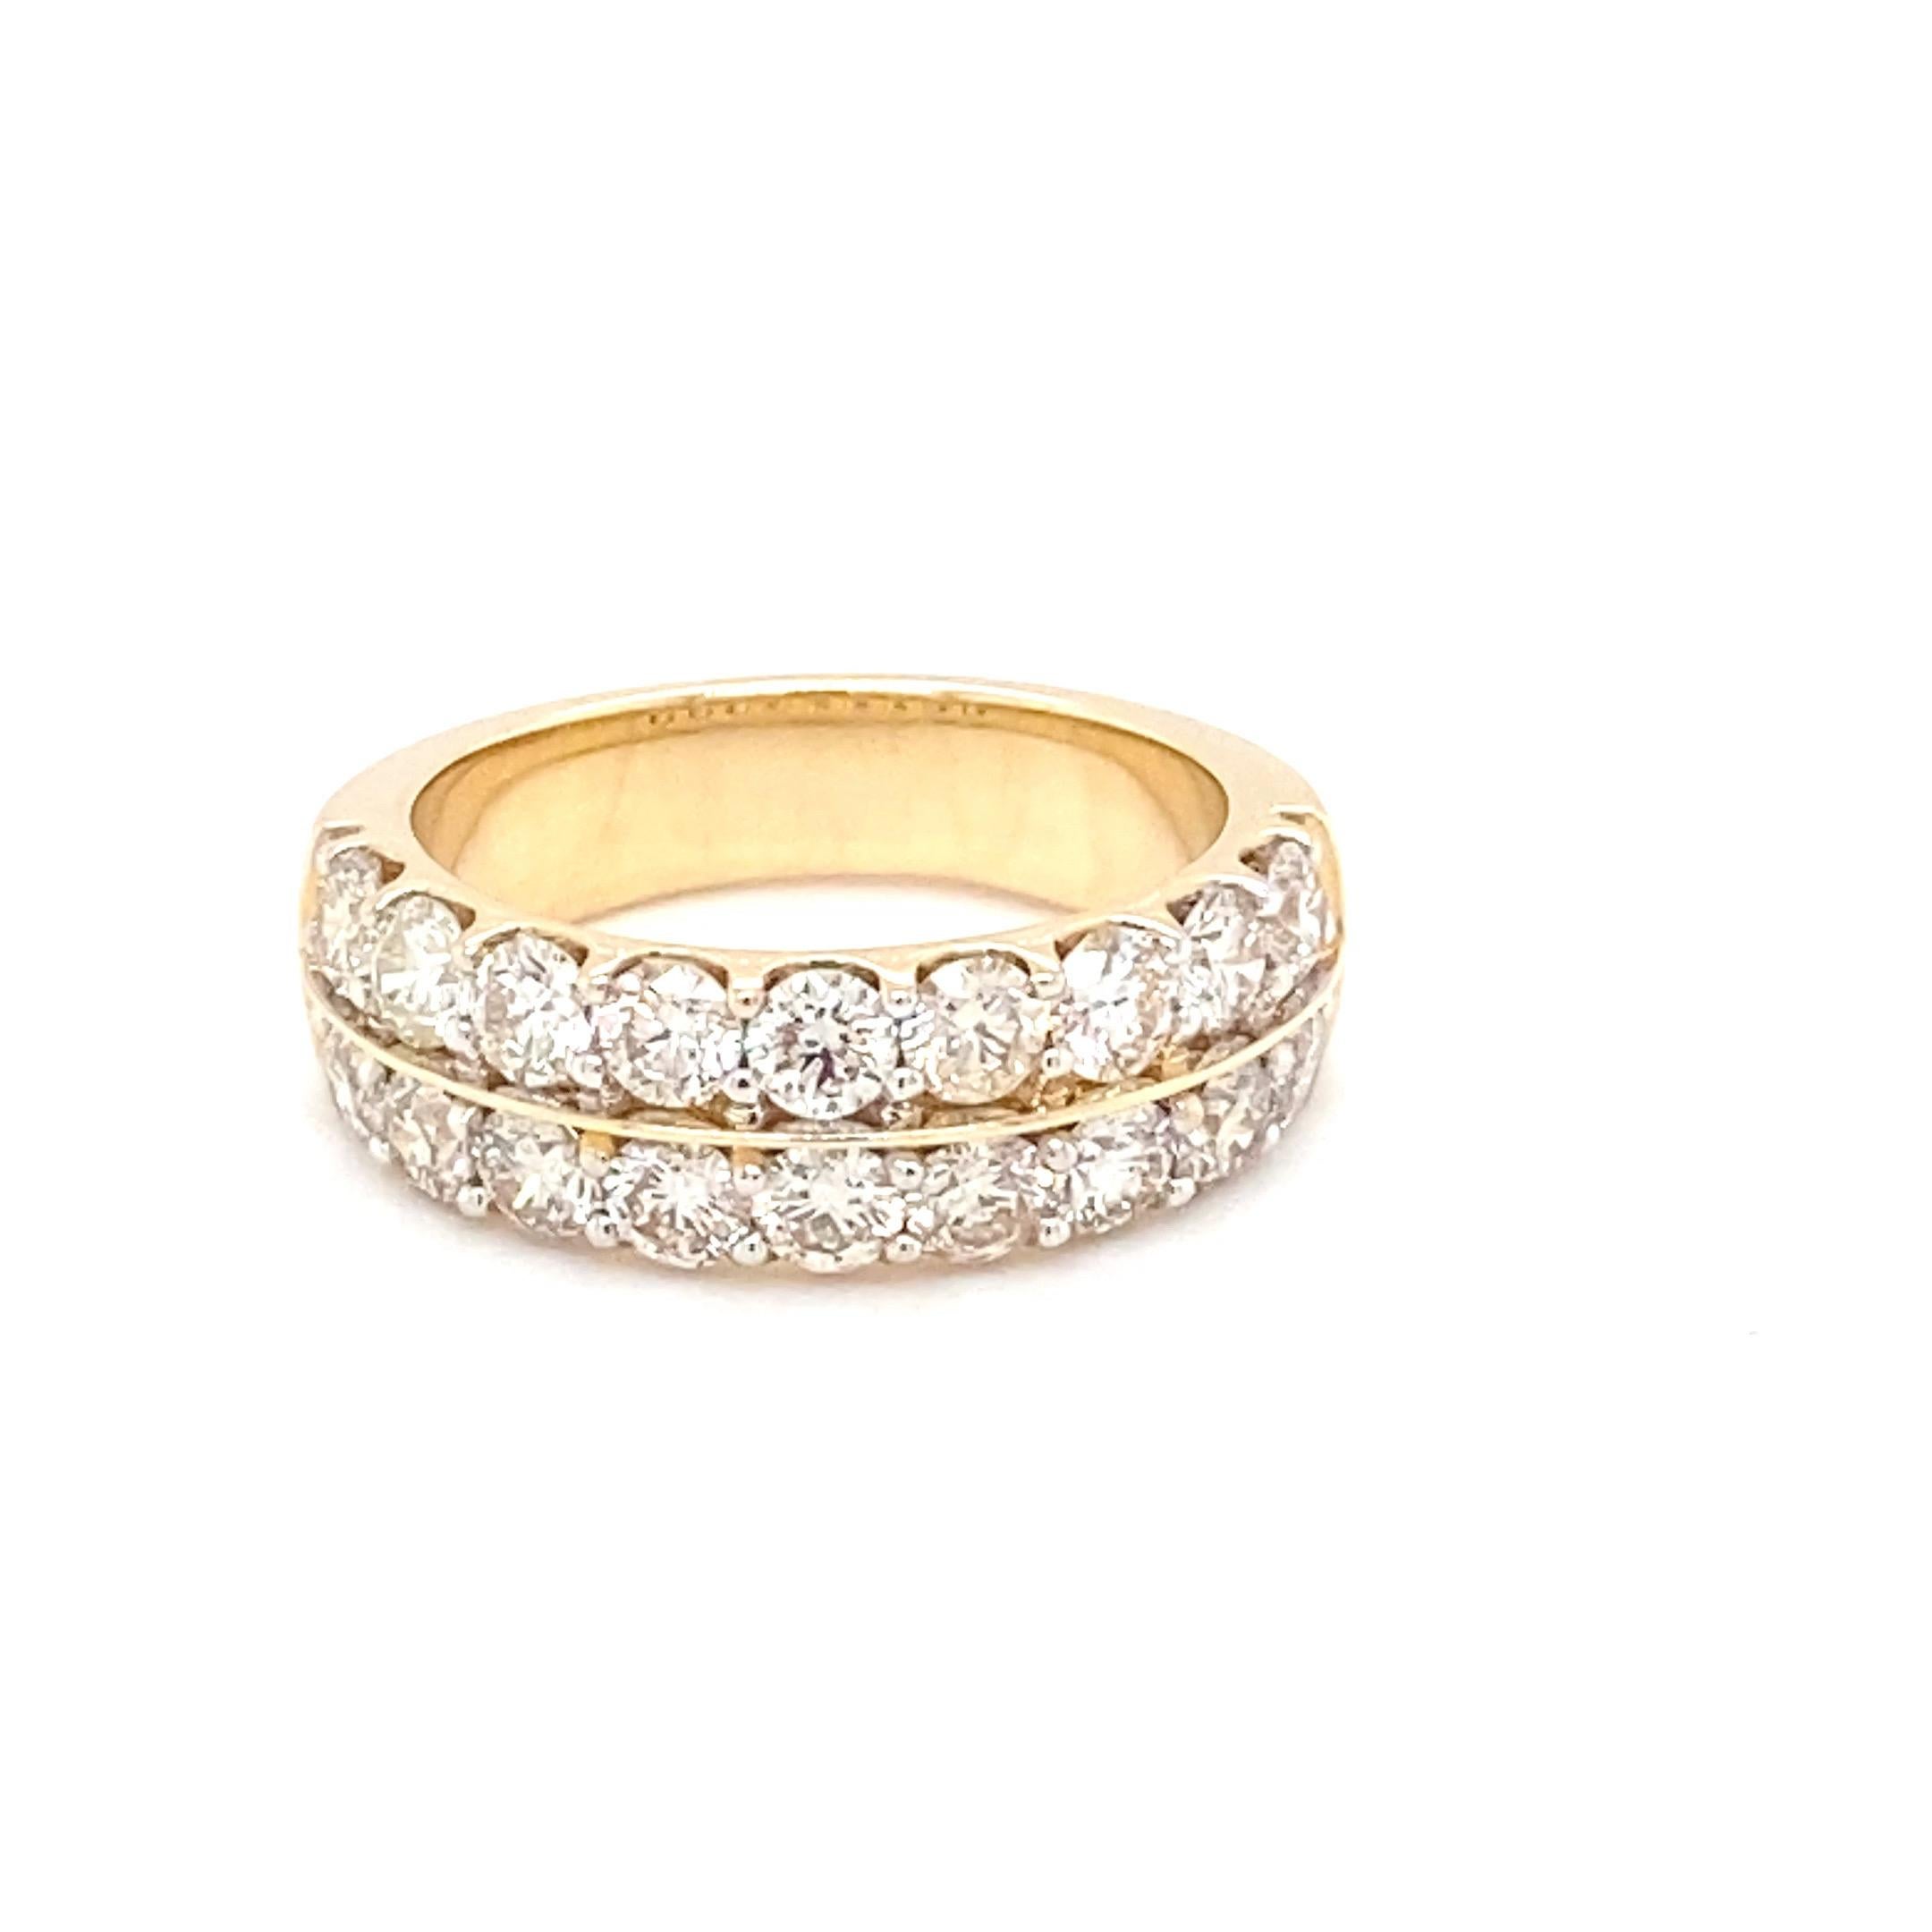 3.00 Carat Diamond Yellow Gold Band Ring For Sale 7